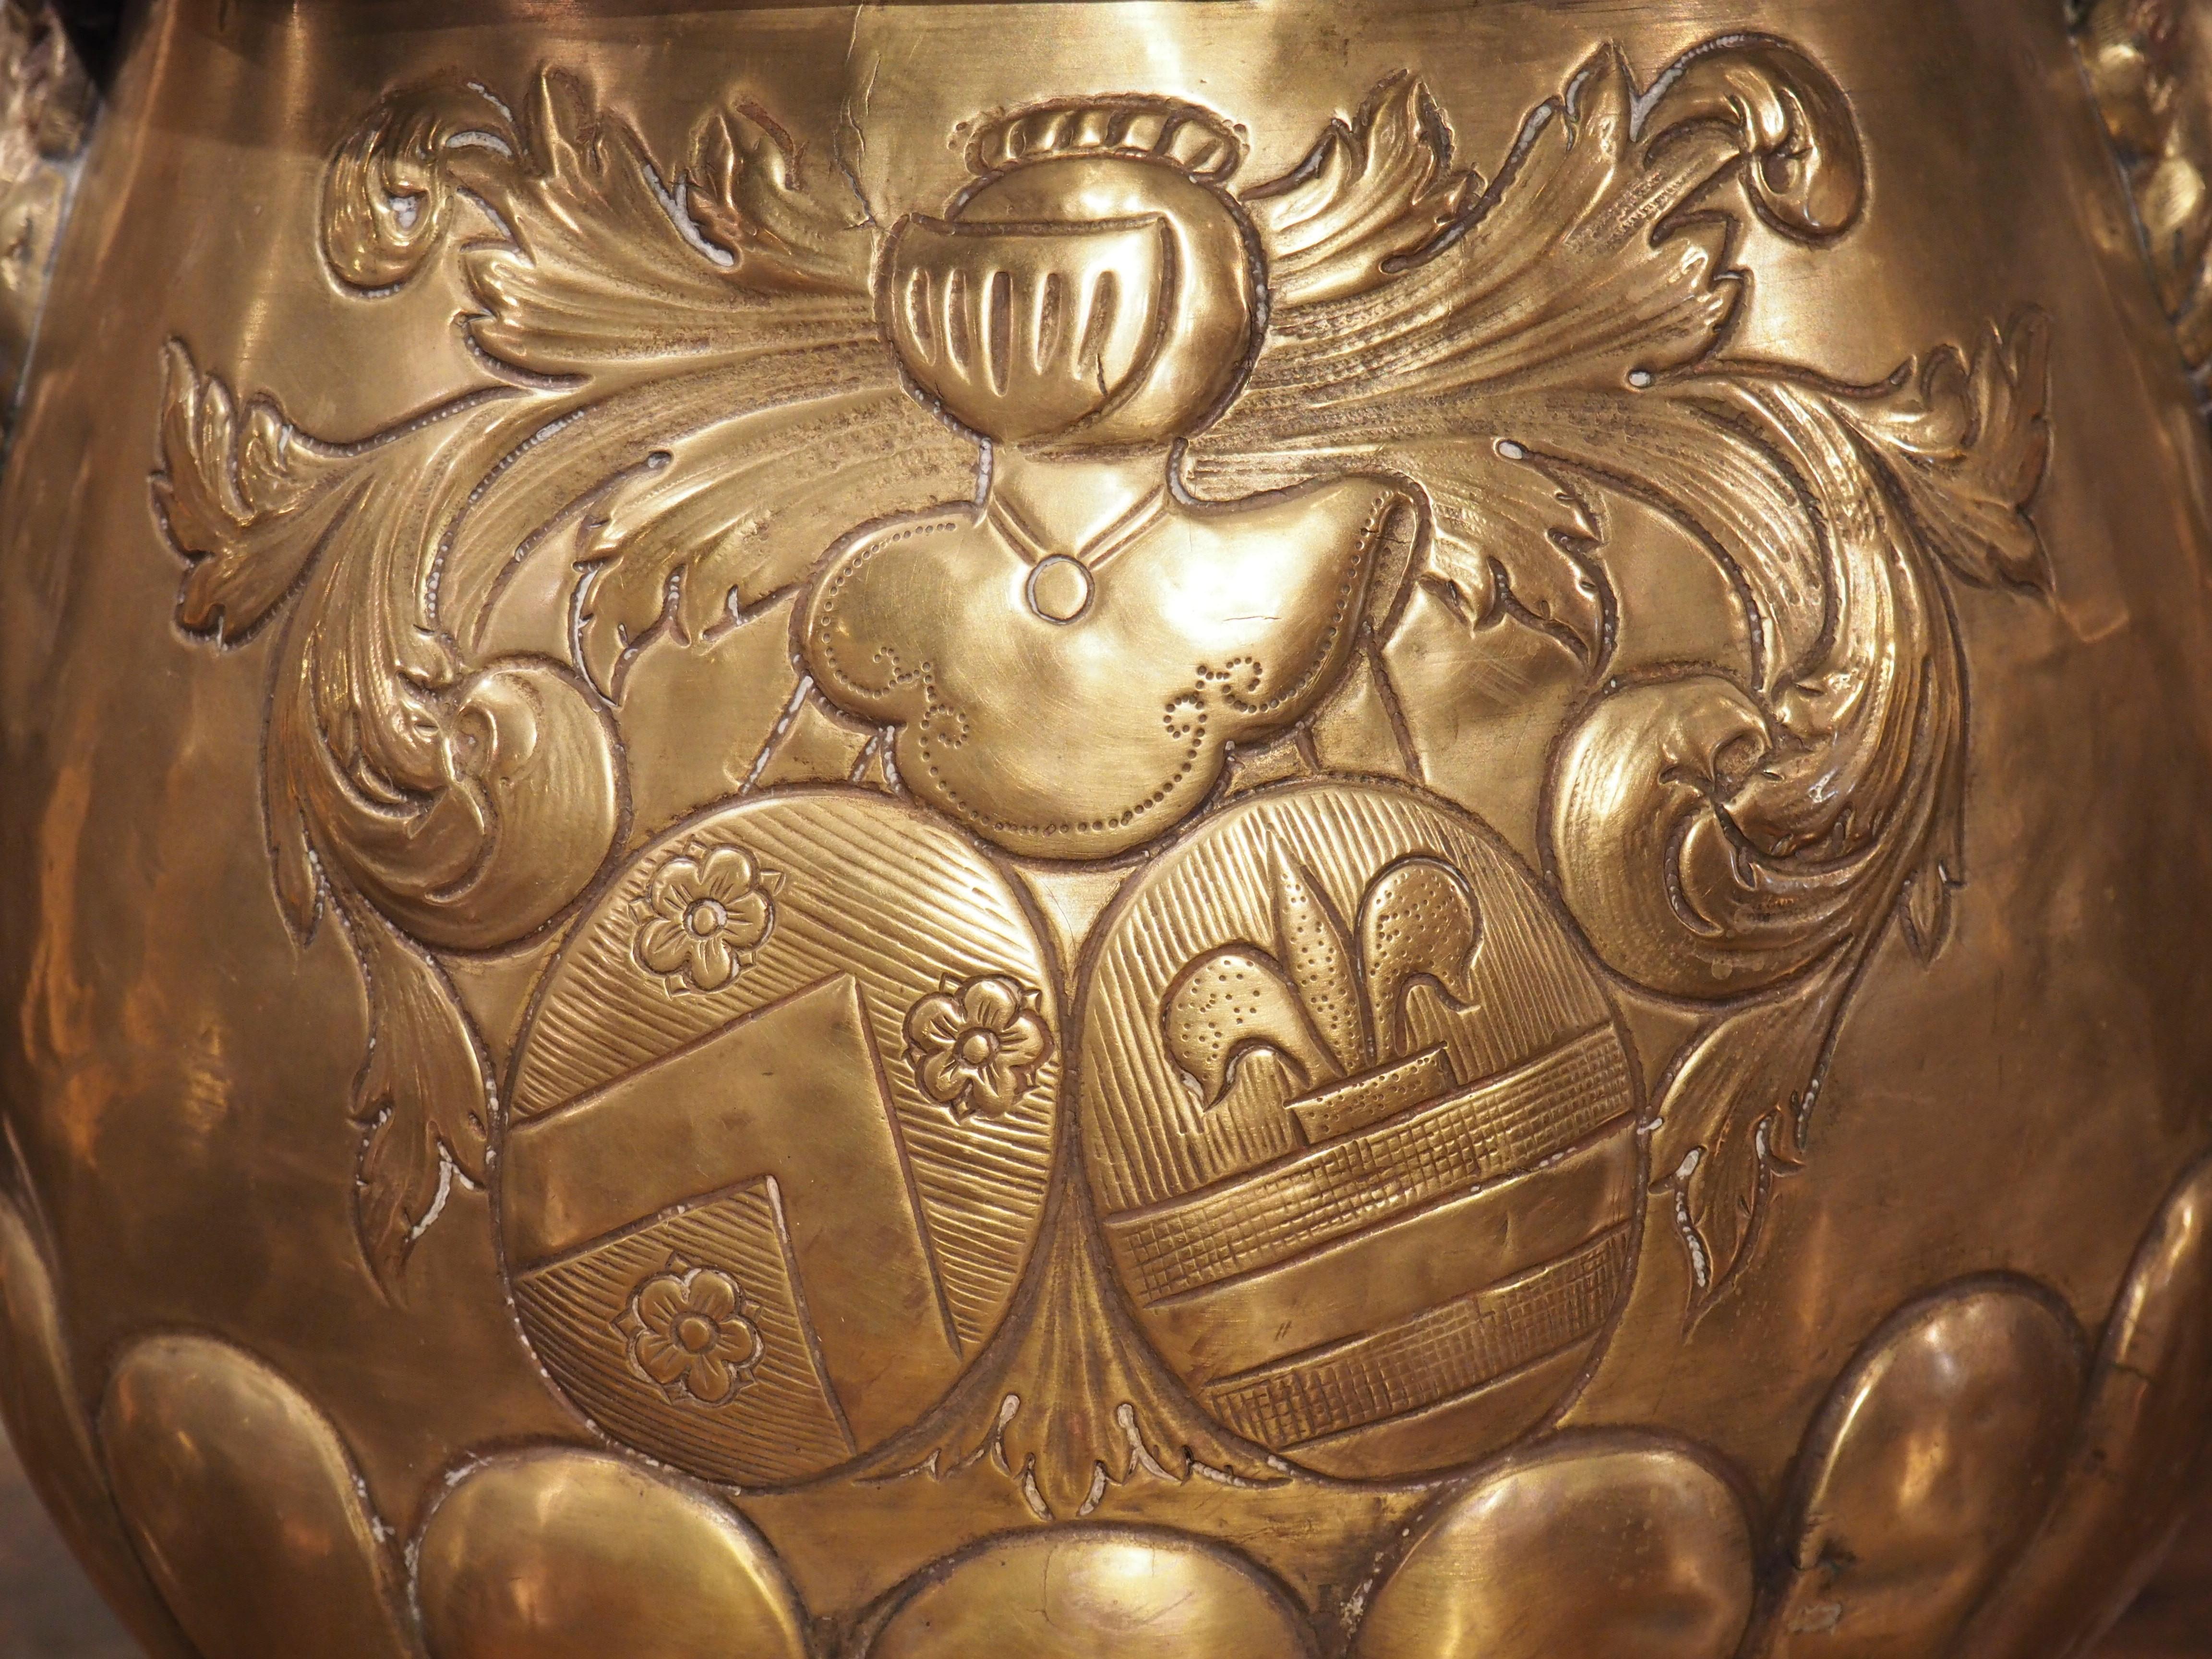 Repoussé 19th Century French Brass Repousse Cachepot with Coats of Arms and Lions For Sale